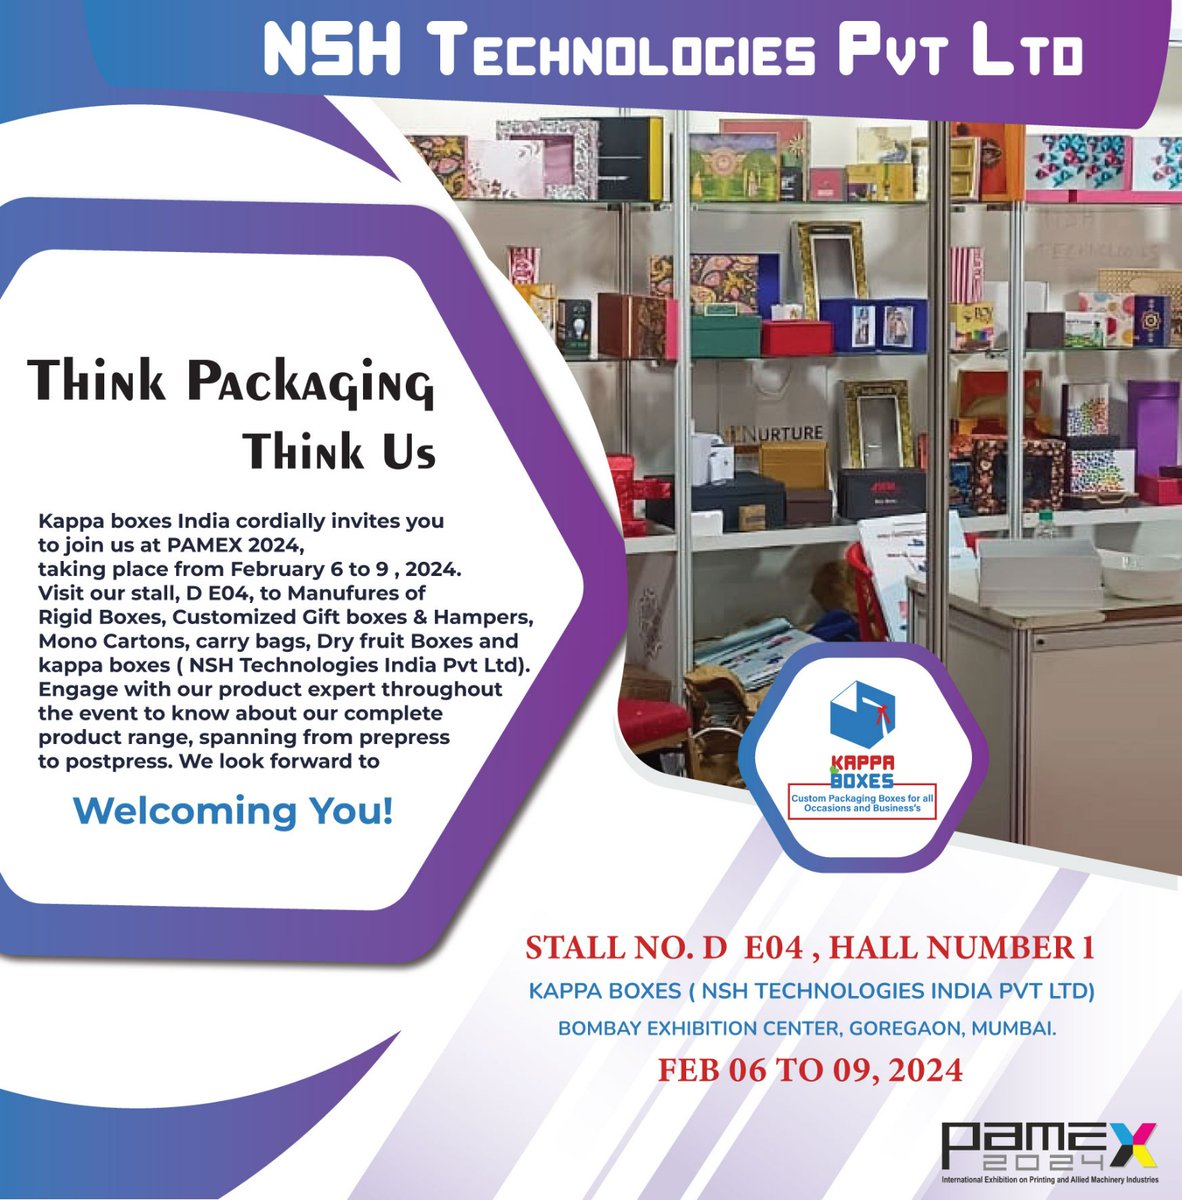 Think Packaging Think Us.
#Pamex#MumbaiExpo#KappaBoxes#Packaging#RigidBoxes#Design#Branding#Printing#CustomPackaging4allOccasions&Businesses#NSHtechnologiesPvtLtd#ExportQualityPackaging#MadeInBharat